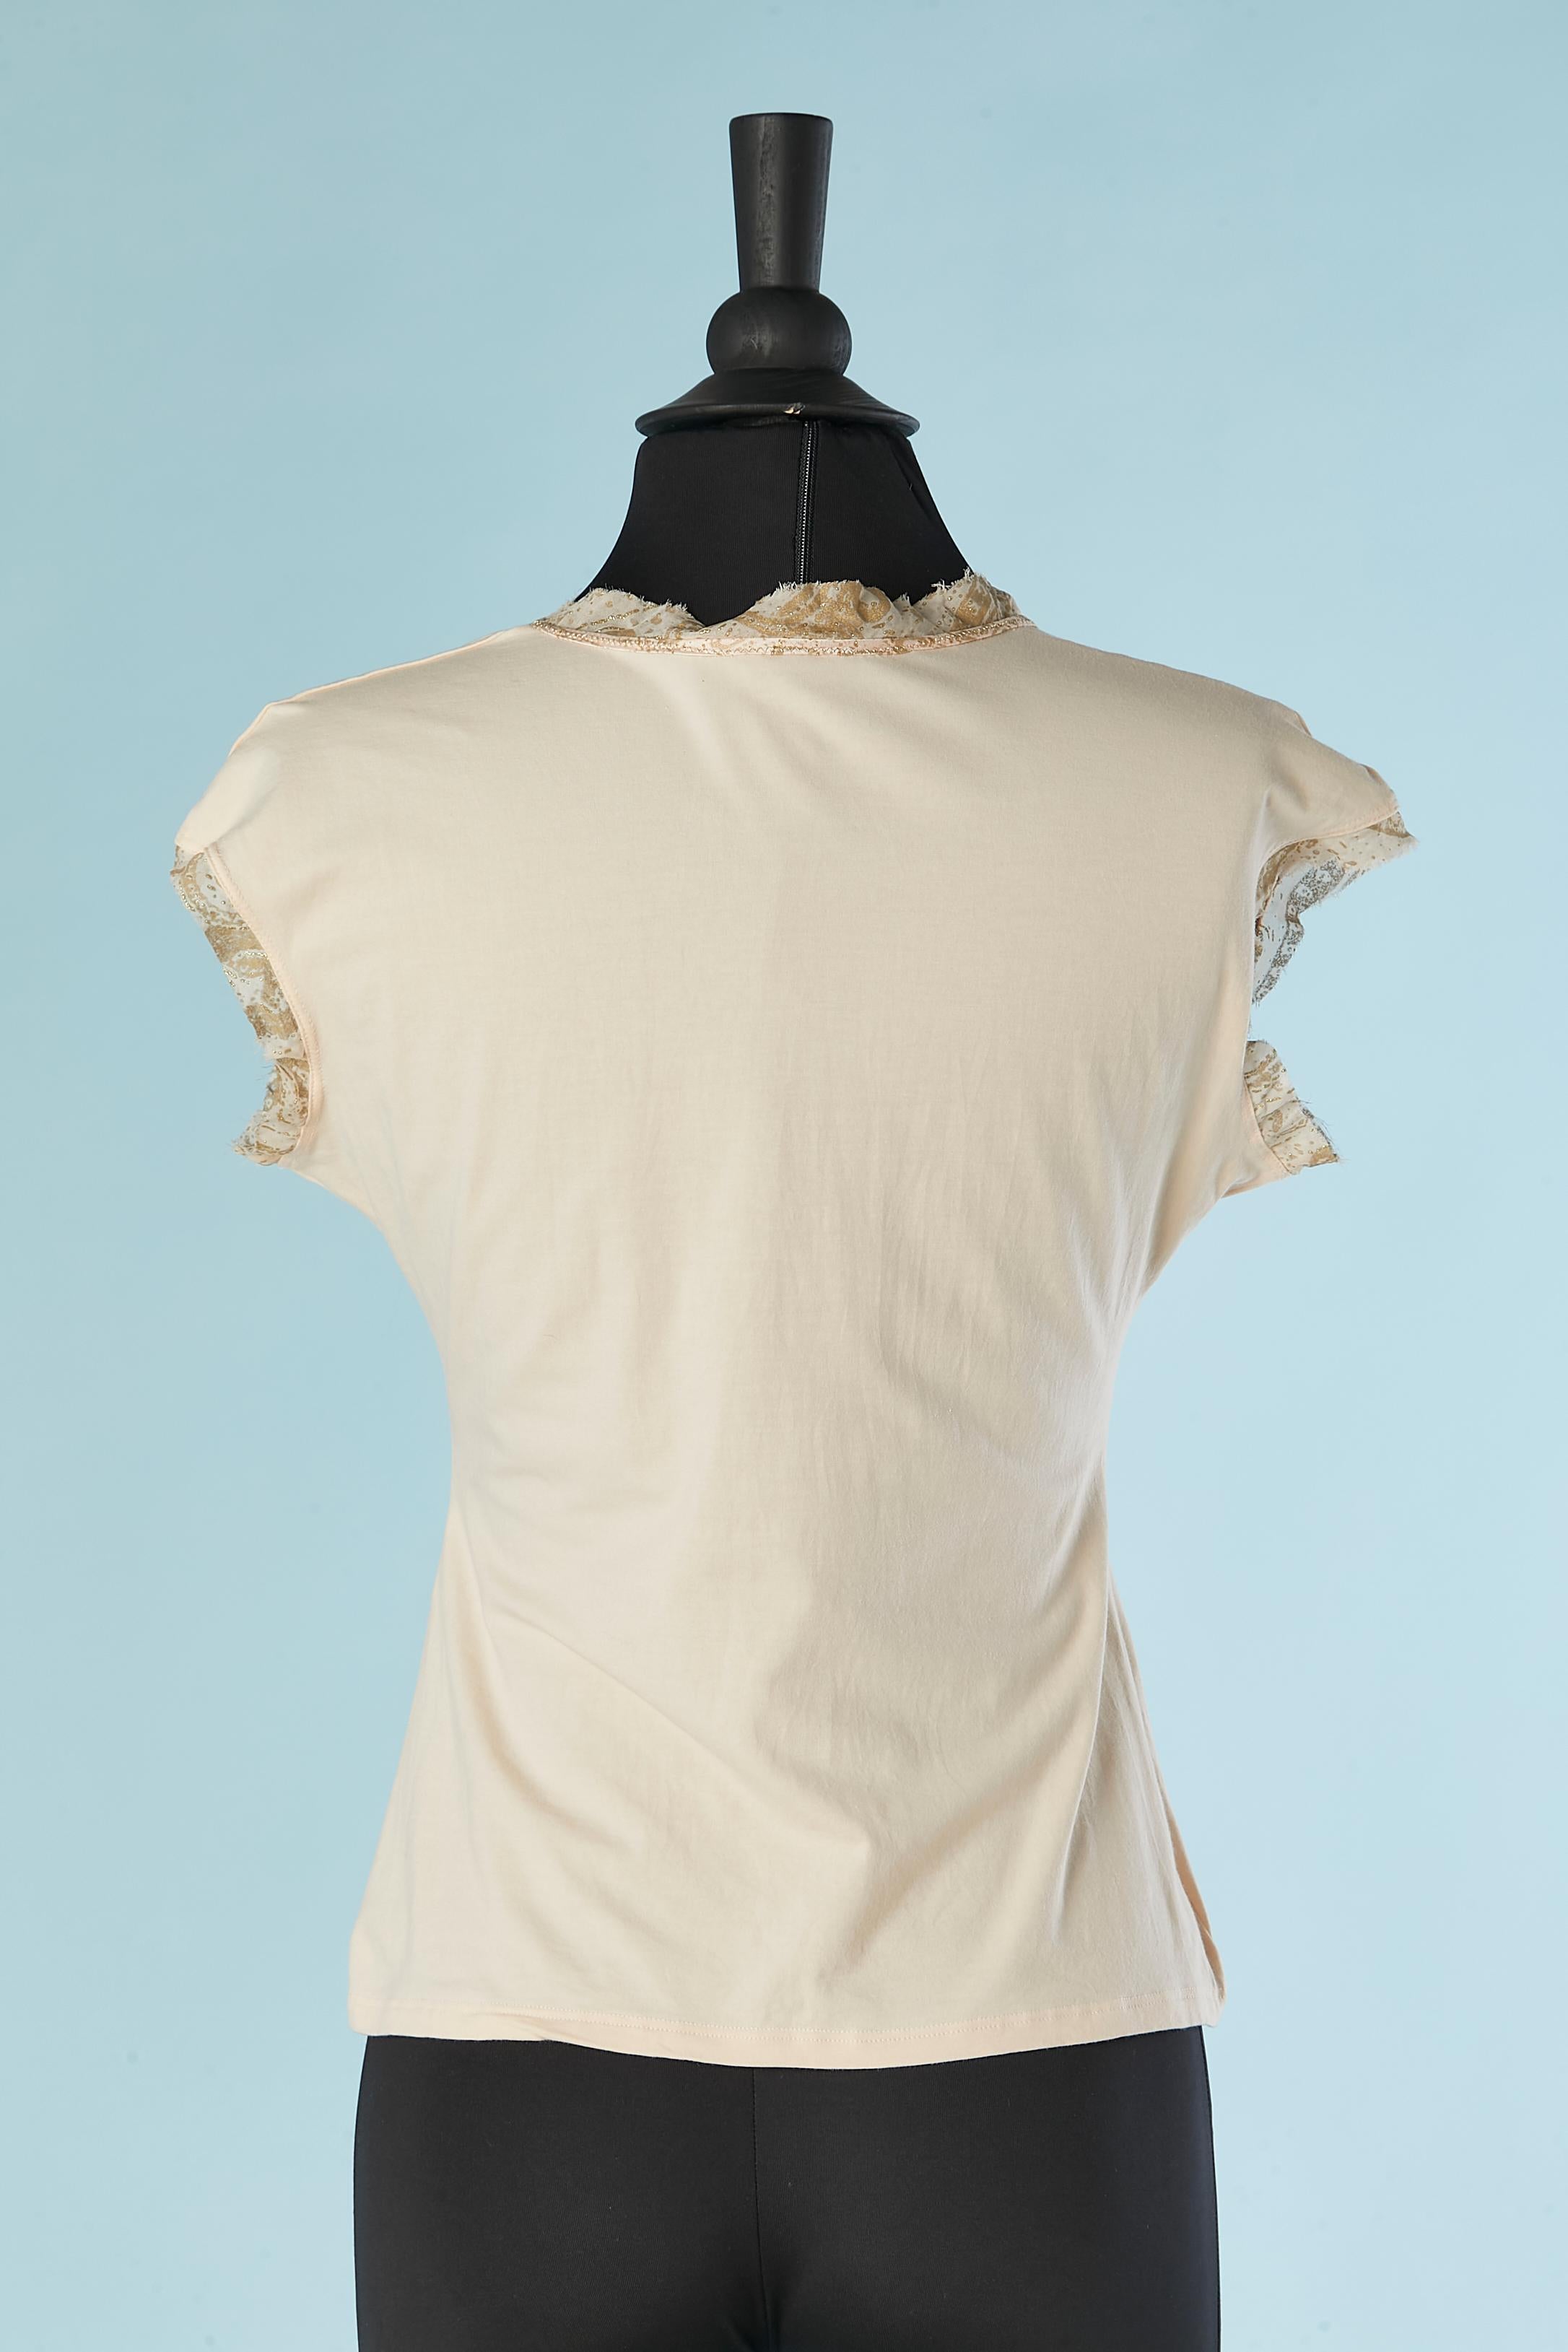 Pink sleeveless tee-shirt with silk laces in the front ROBERTO CAVALLI  For Sale 1